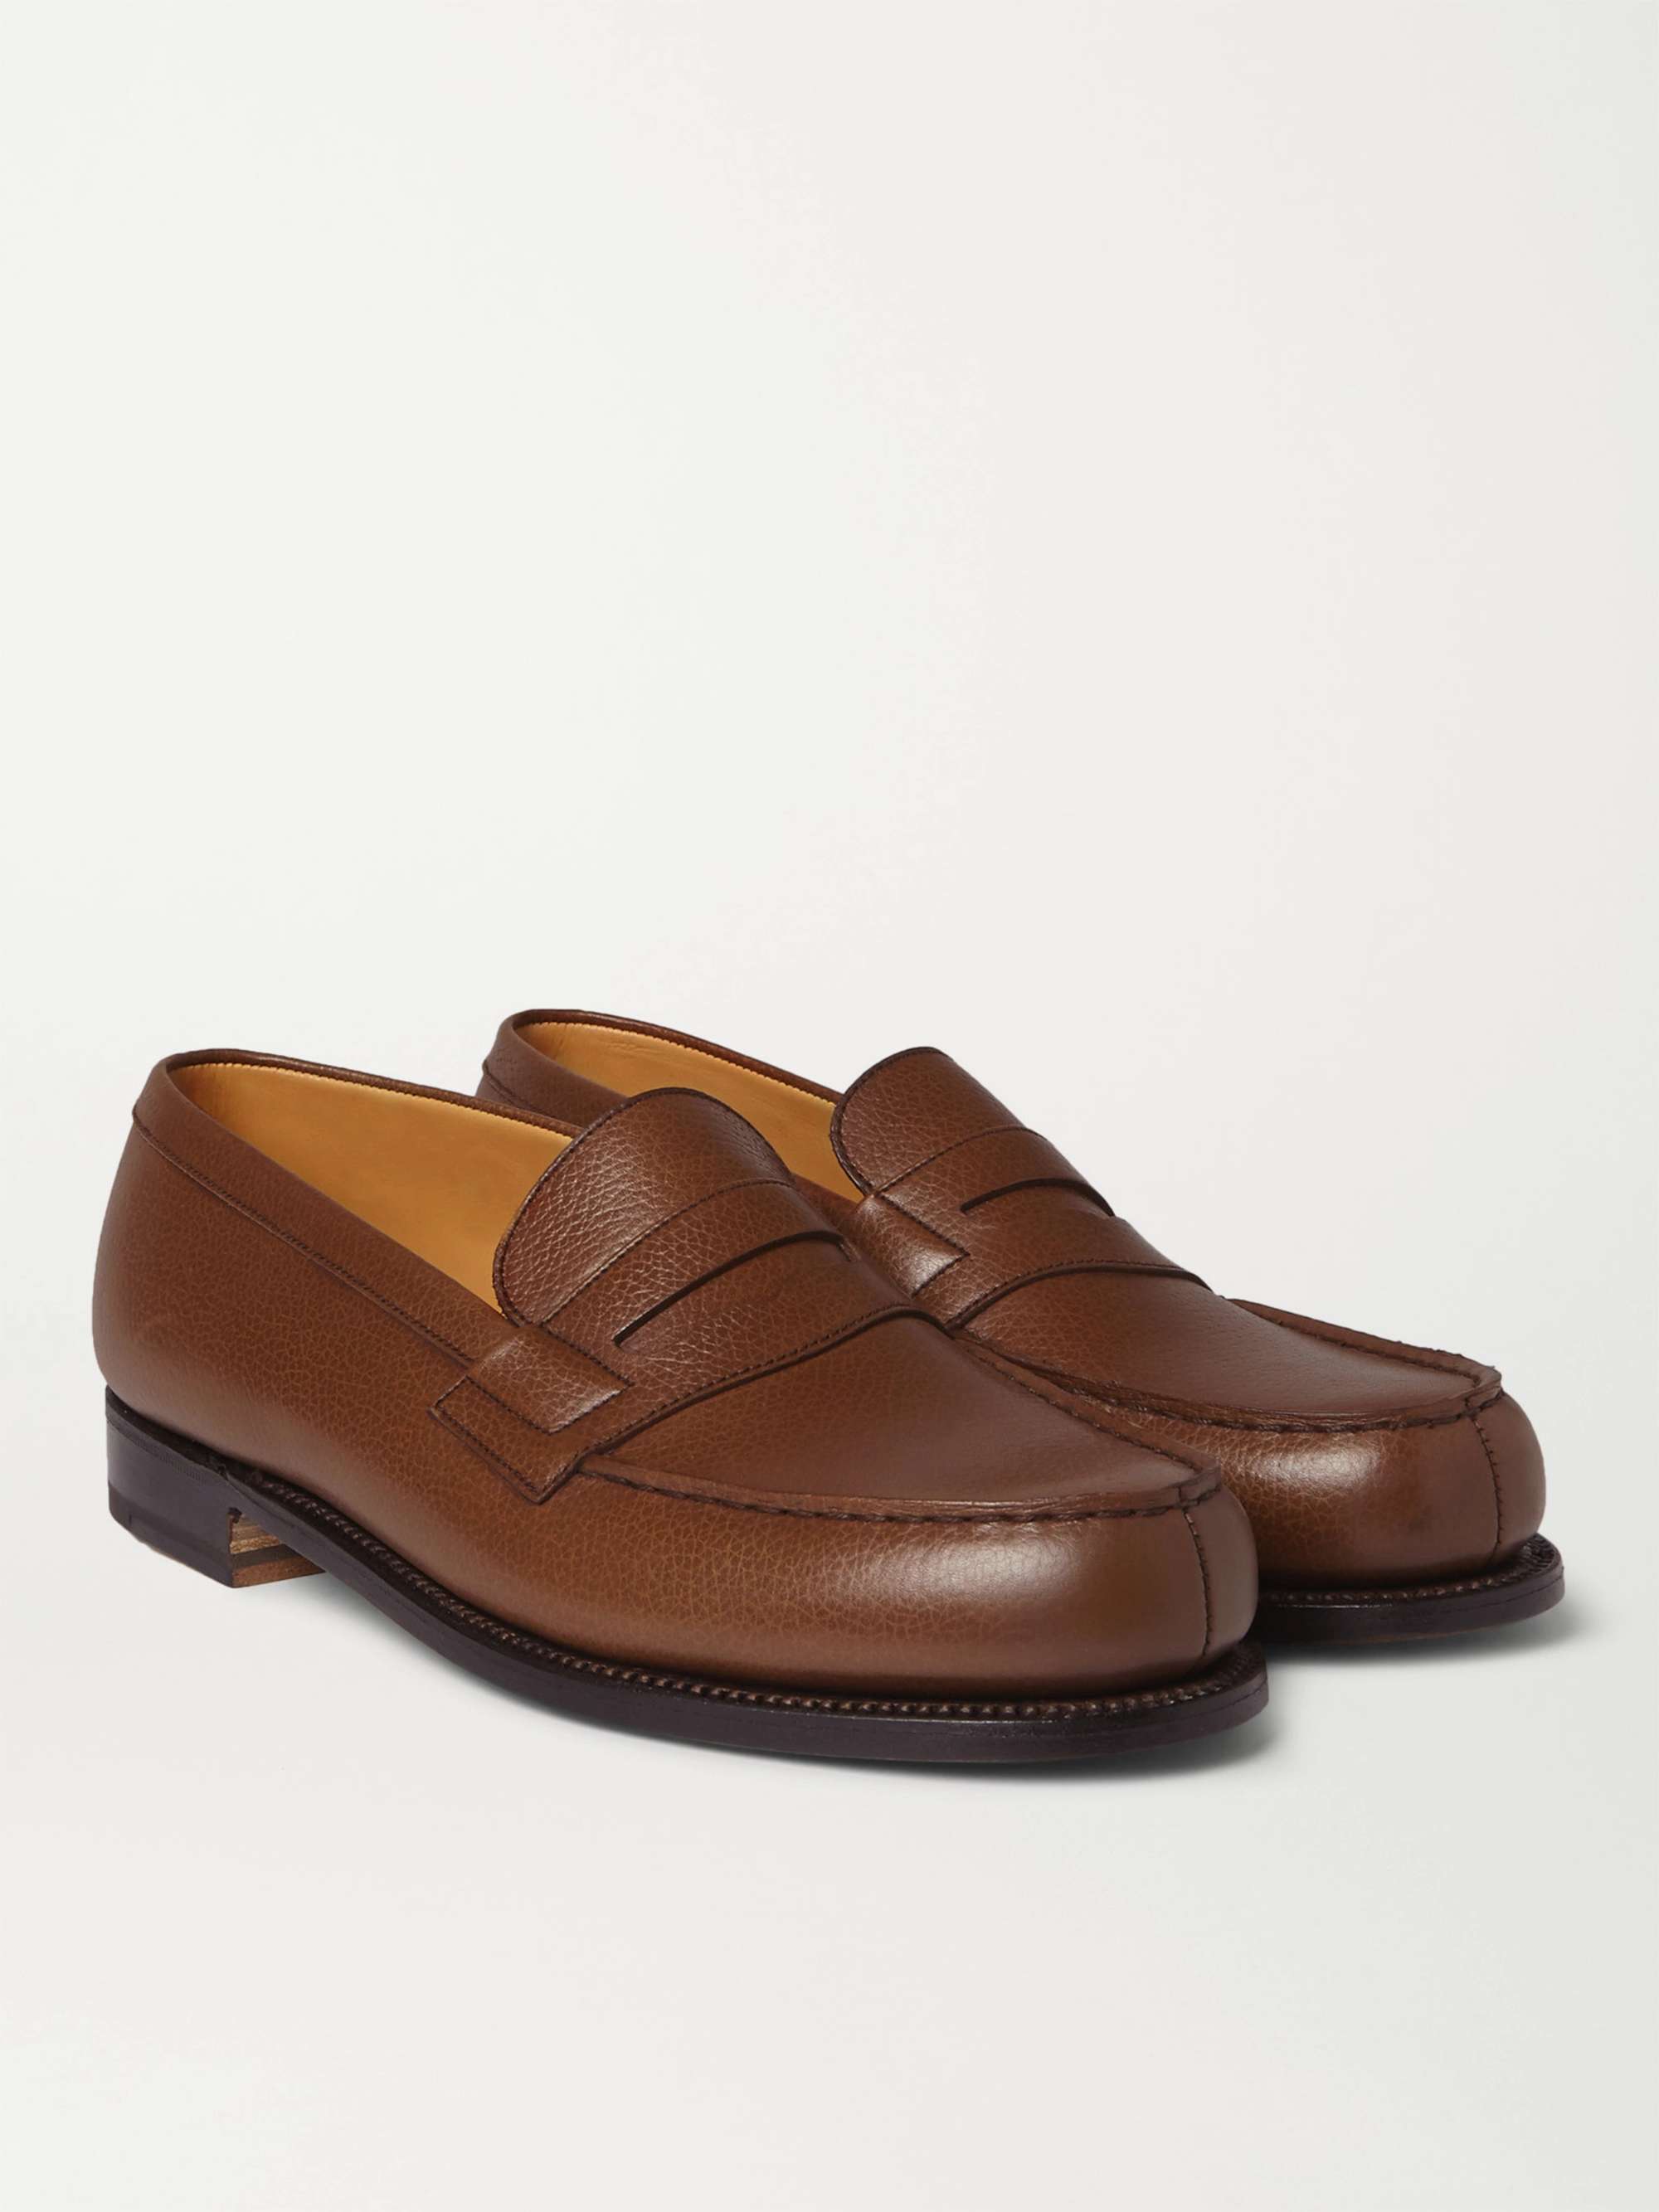 J.M. WESTON 180 Moccasin Grained-Leather Loafers